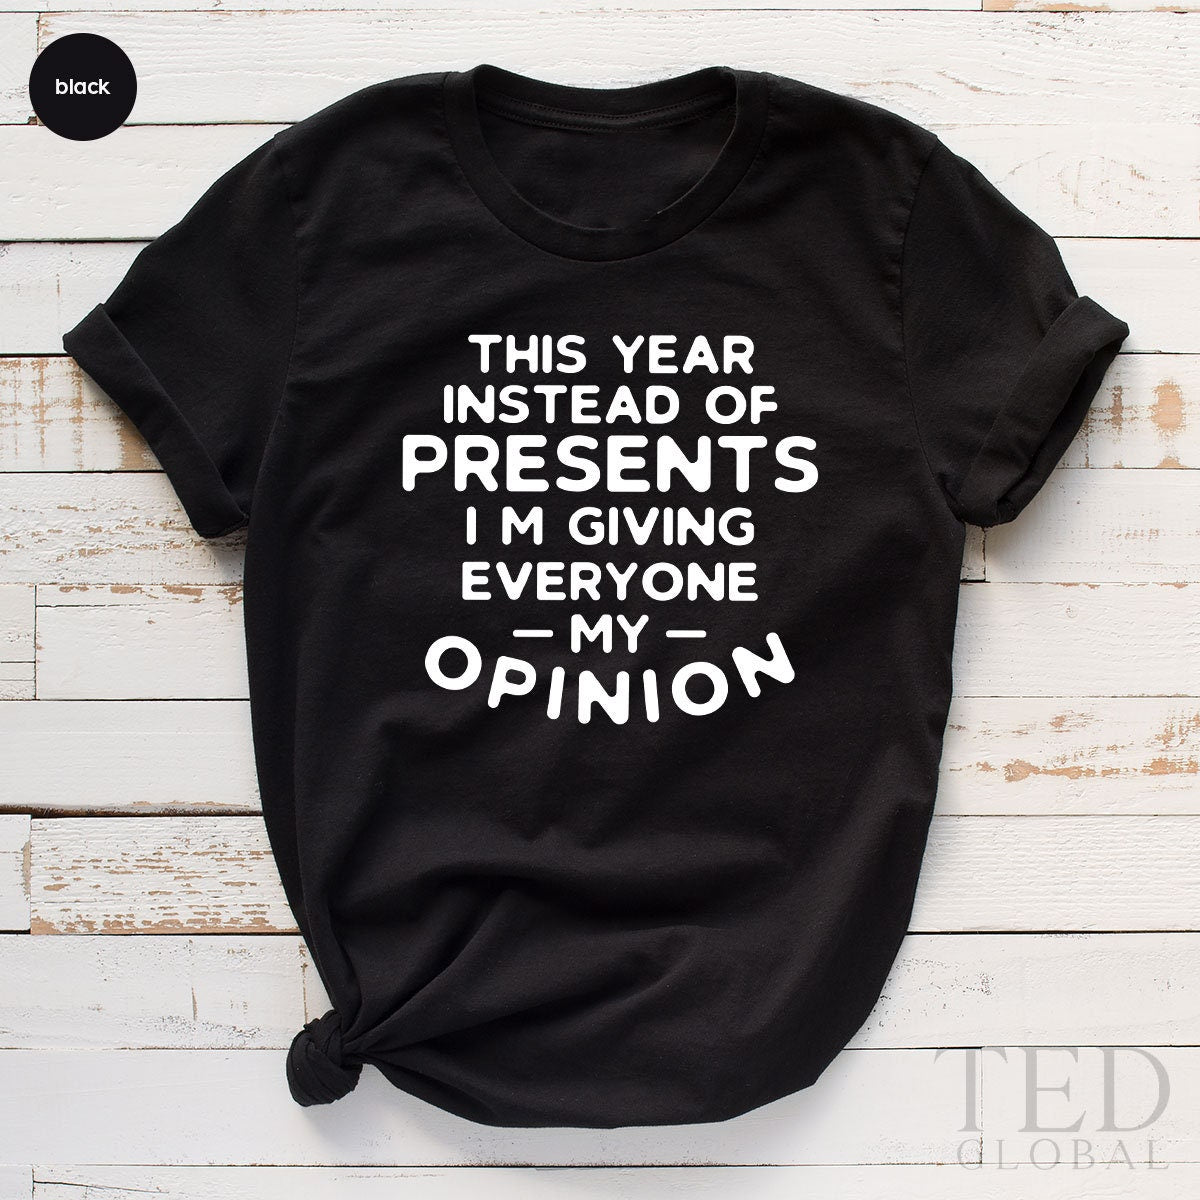 Cute Christmas Saying T-Shirt, This Year İnstead Of Presents Im Giving Everyone My Opinion Shirts, Sarcasm Xmas Shirts, Gift For Christmas - Fastdeliverytees.com